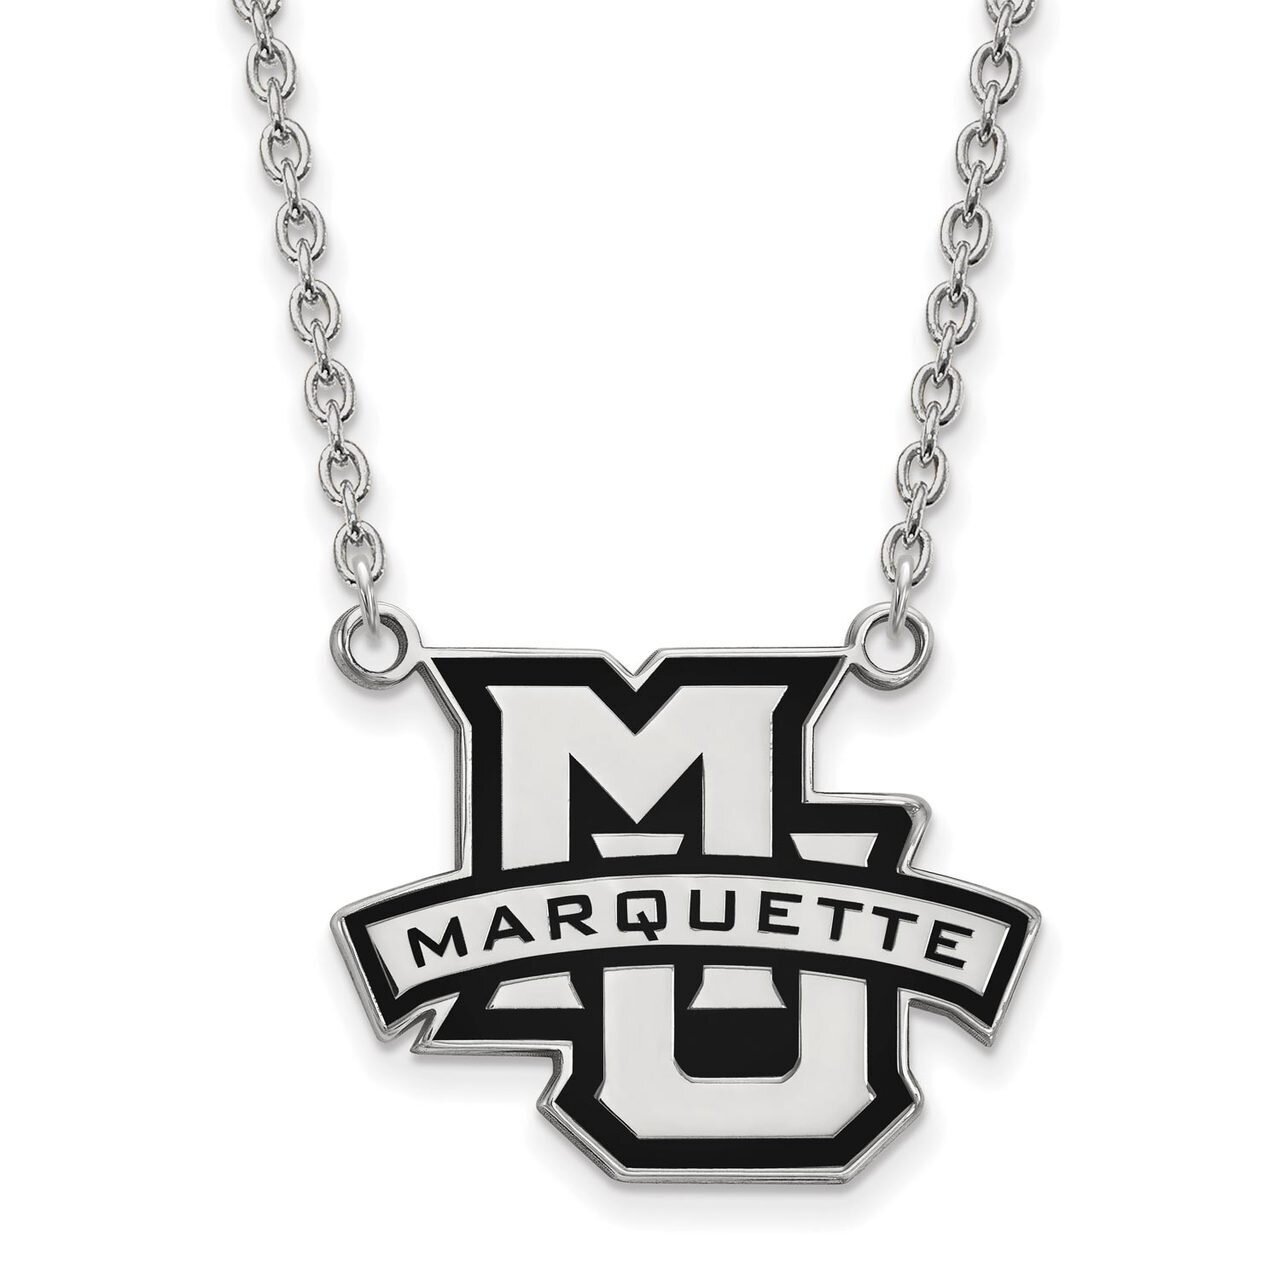 Marquette University Large Enamel Pendant with Necklace Sterling Silver SS030MAR